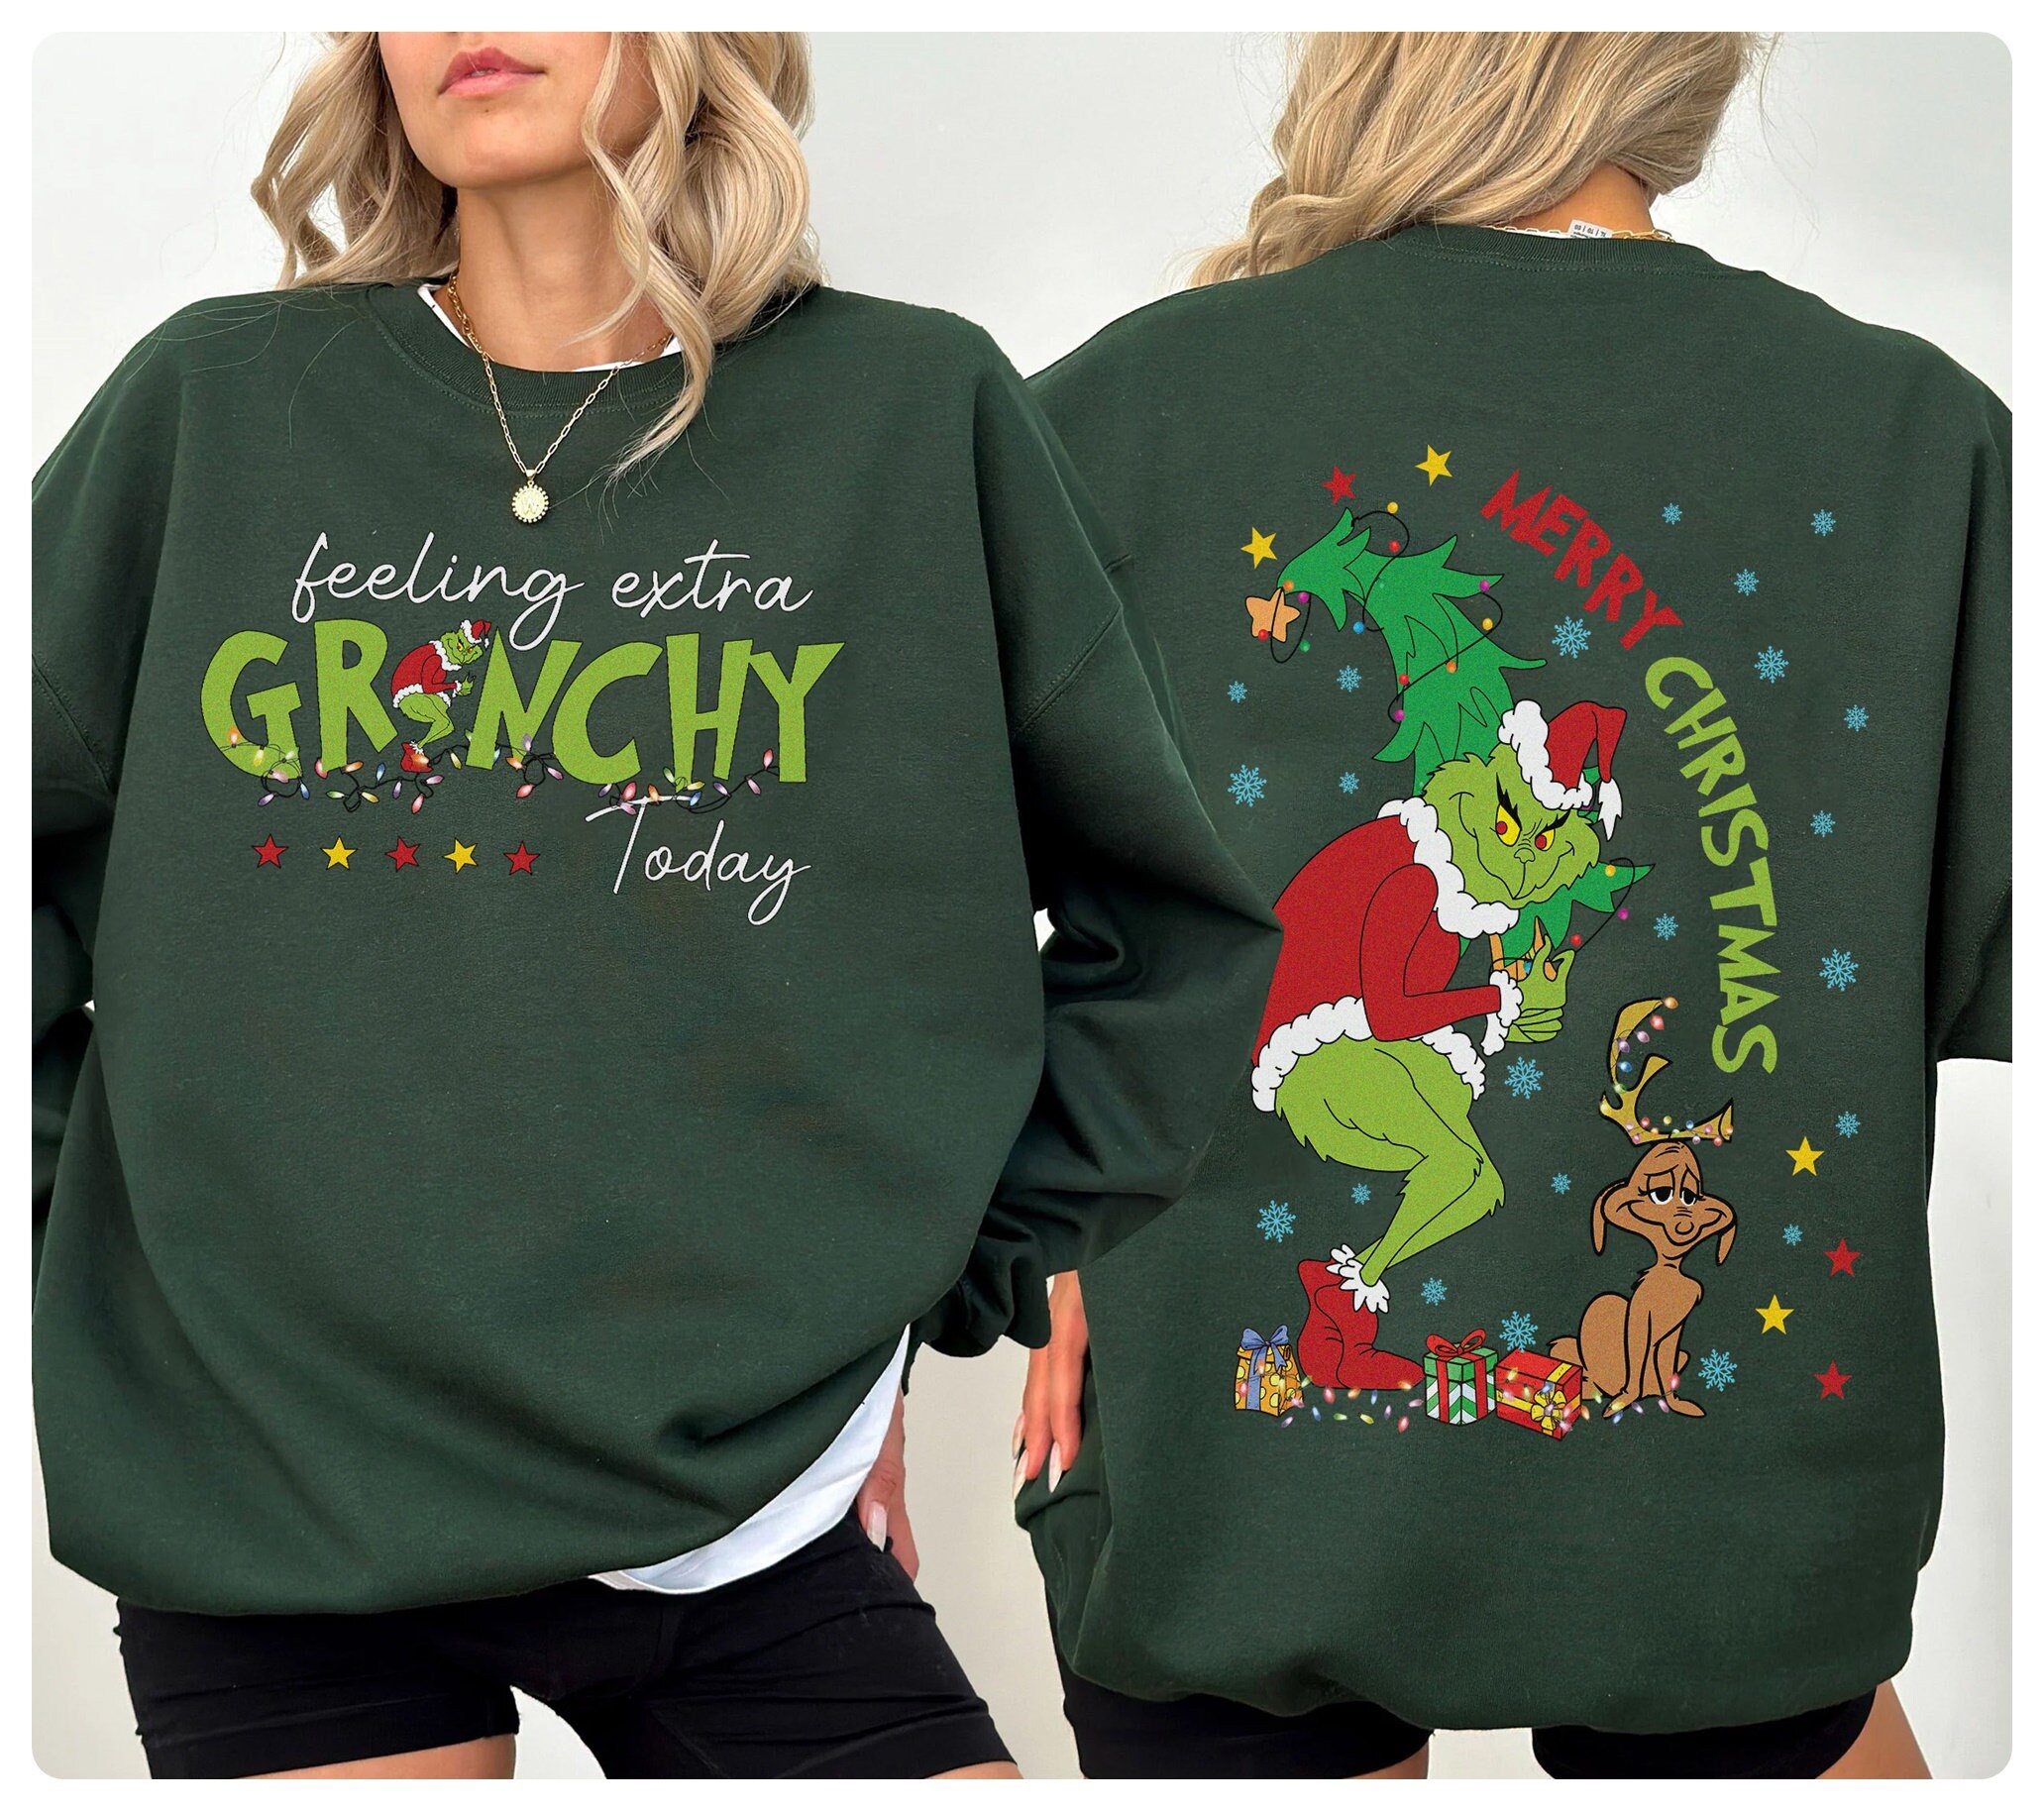 Grinch Feeling Extra Grinchy Today Christmas Shirt, The Grinch Christmas Sweatshirt, Grinch Squad Shirt, Grinchmas Shirt, Christmas Party